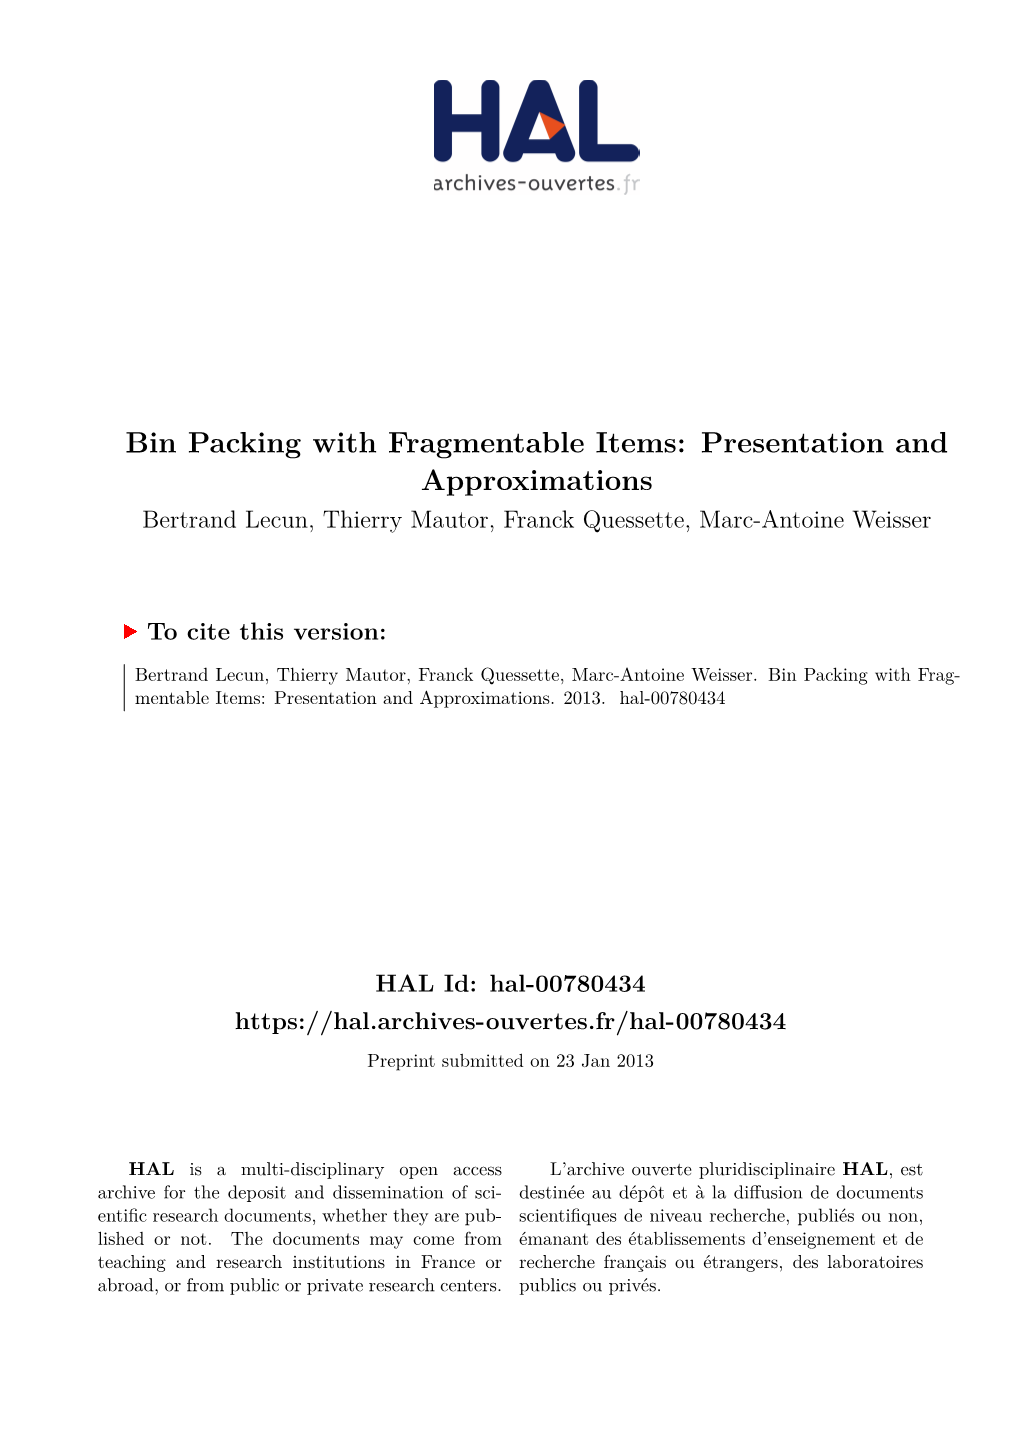 Bin Packing with Fragmentable Items: Presentation and Approximations Bertrand Lecun, Thierry Mautor, Franck Quessette, Marc-Antoine Weisser